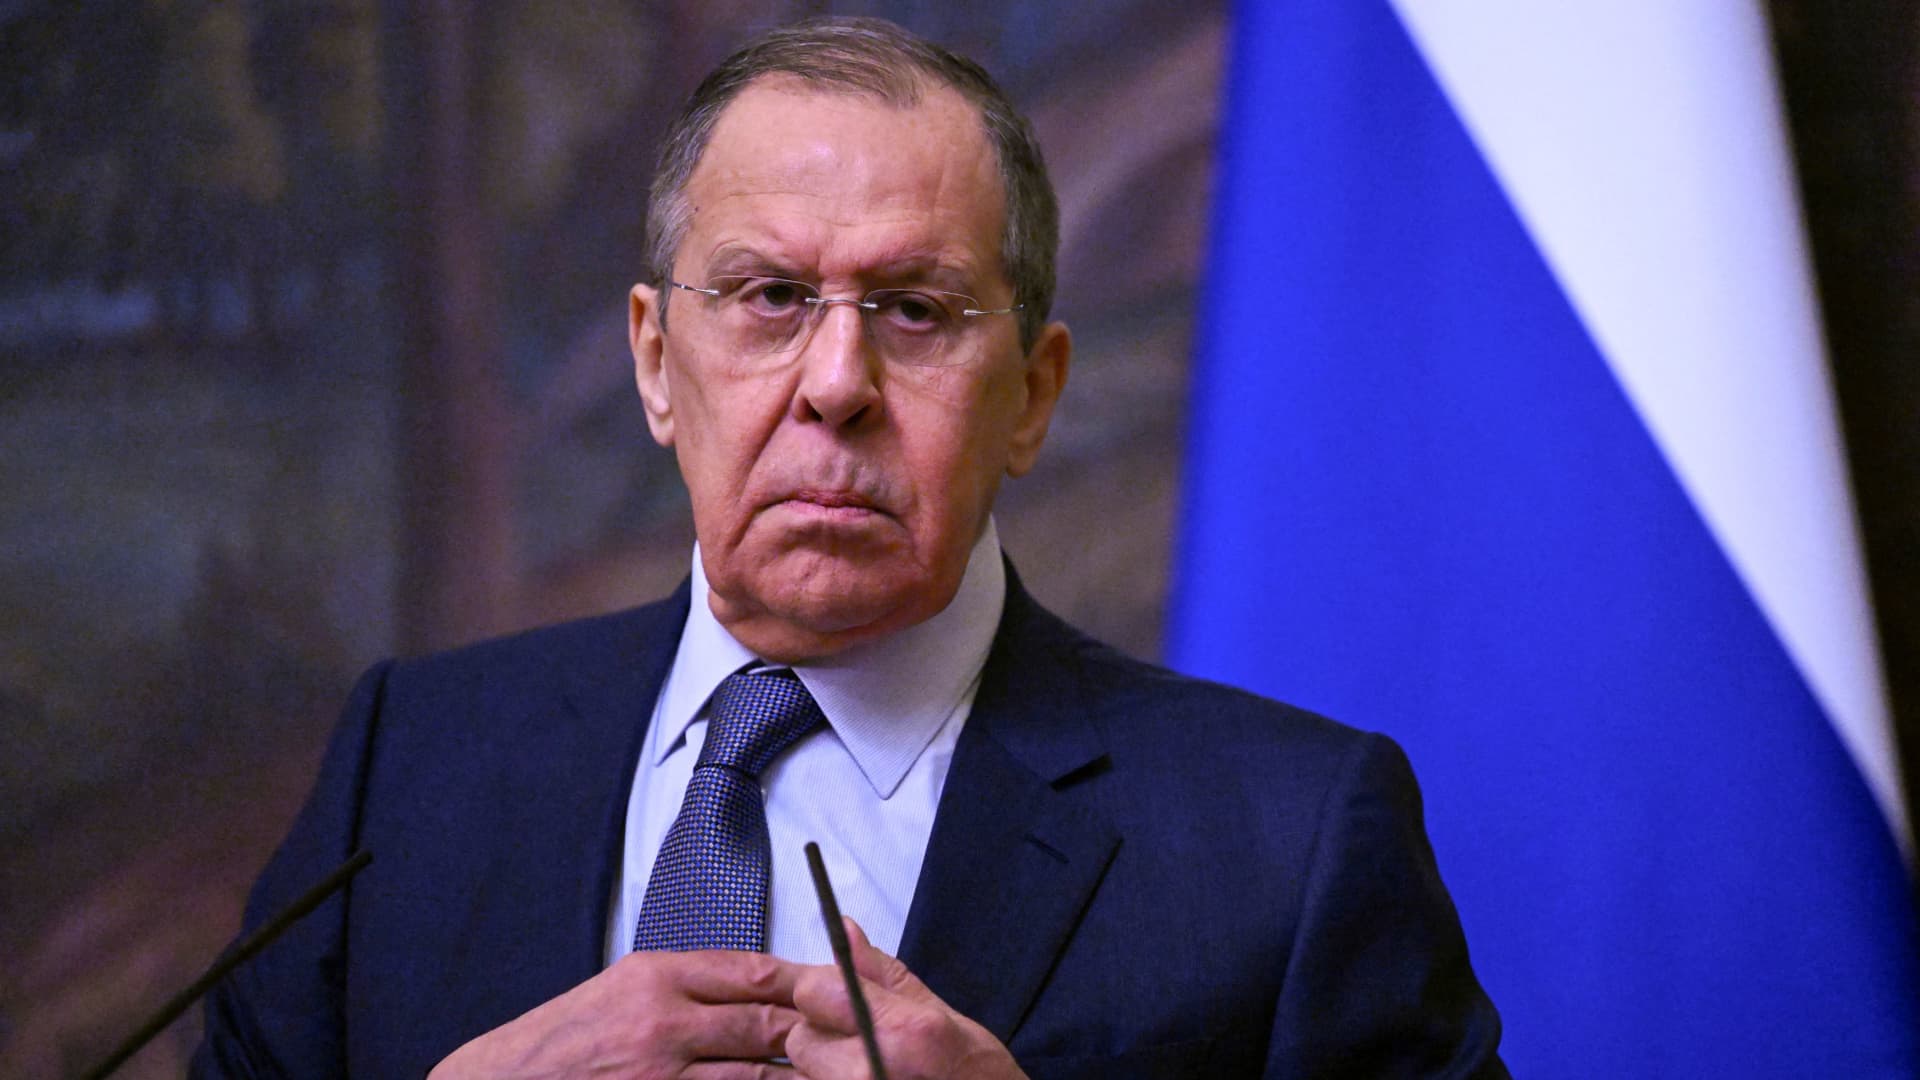 Russian Foreign Minister Sergei Lavrov attends a news conference following talks with President of the International Committee of the Red Cross (ICRC) Peter Maurer in Moscow, Russia March 24, 2022.